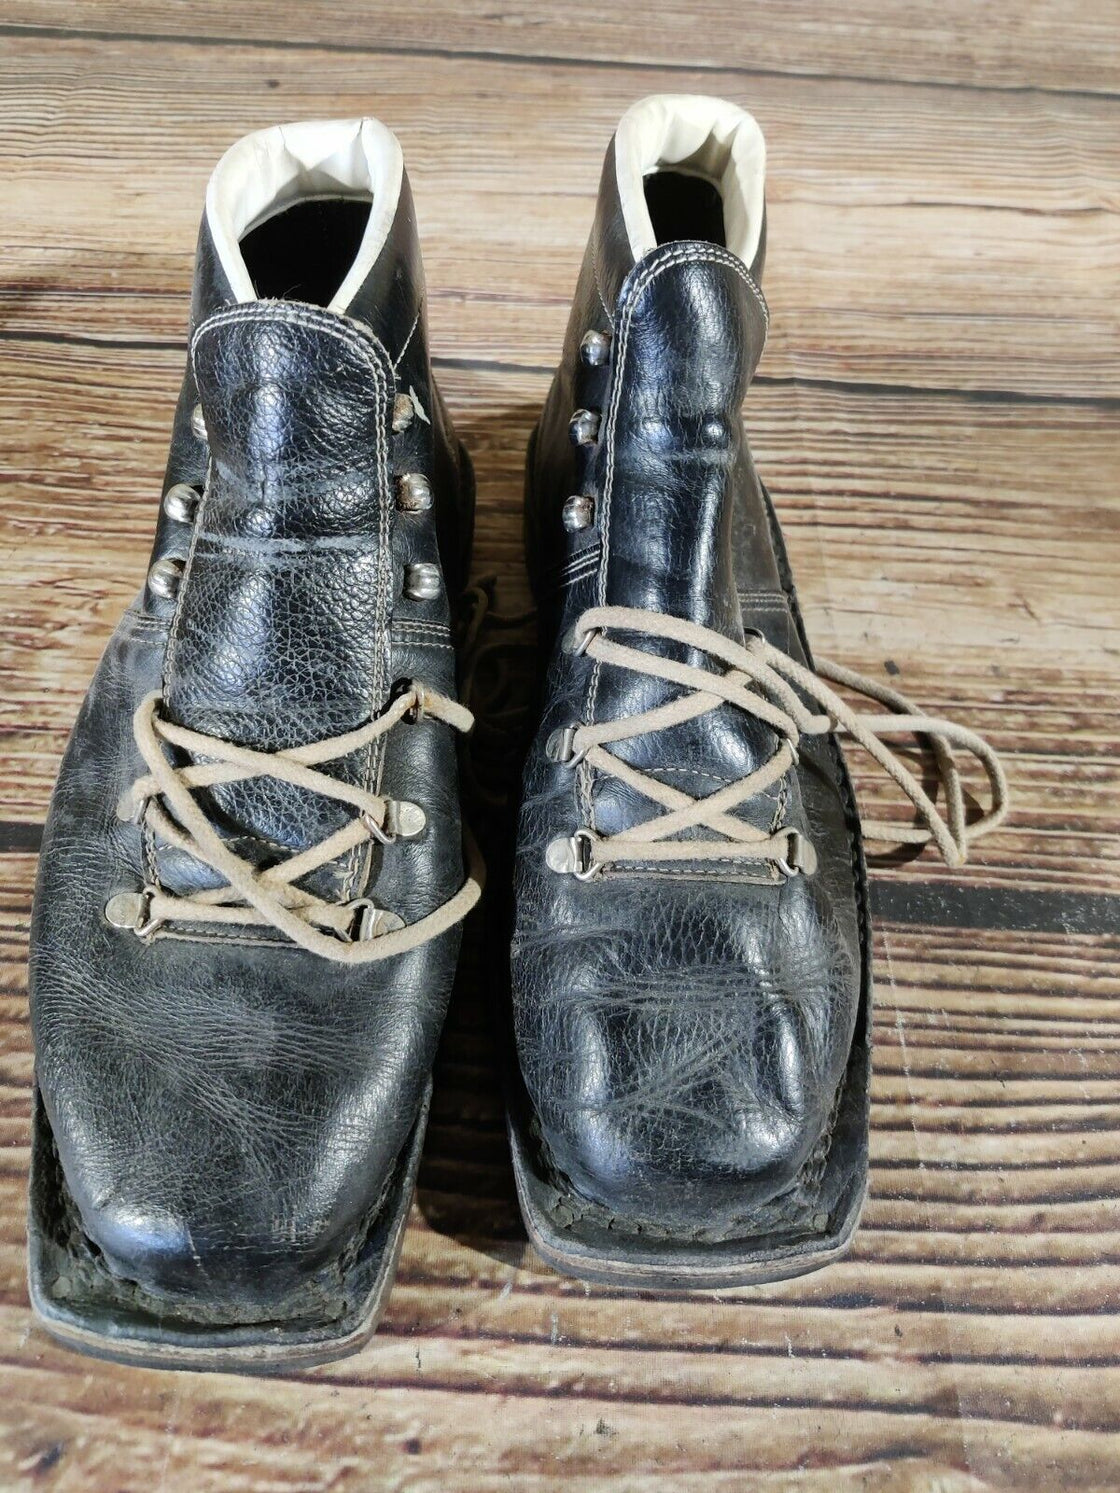 DALEX Vintage Cross Country Ski Boots for Kandahar Old Cable Binding EU43, US9